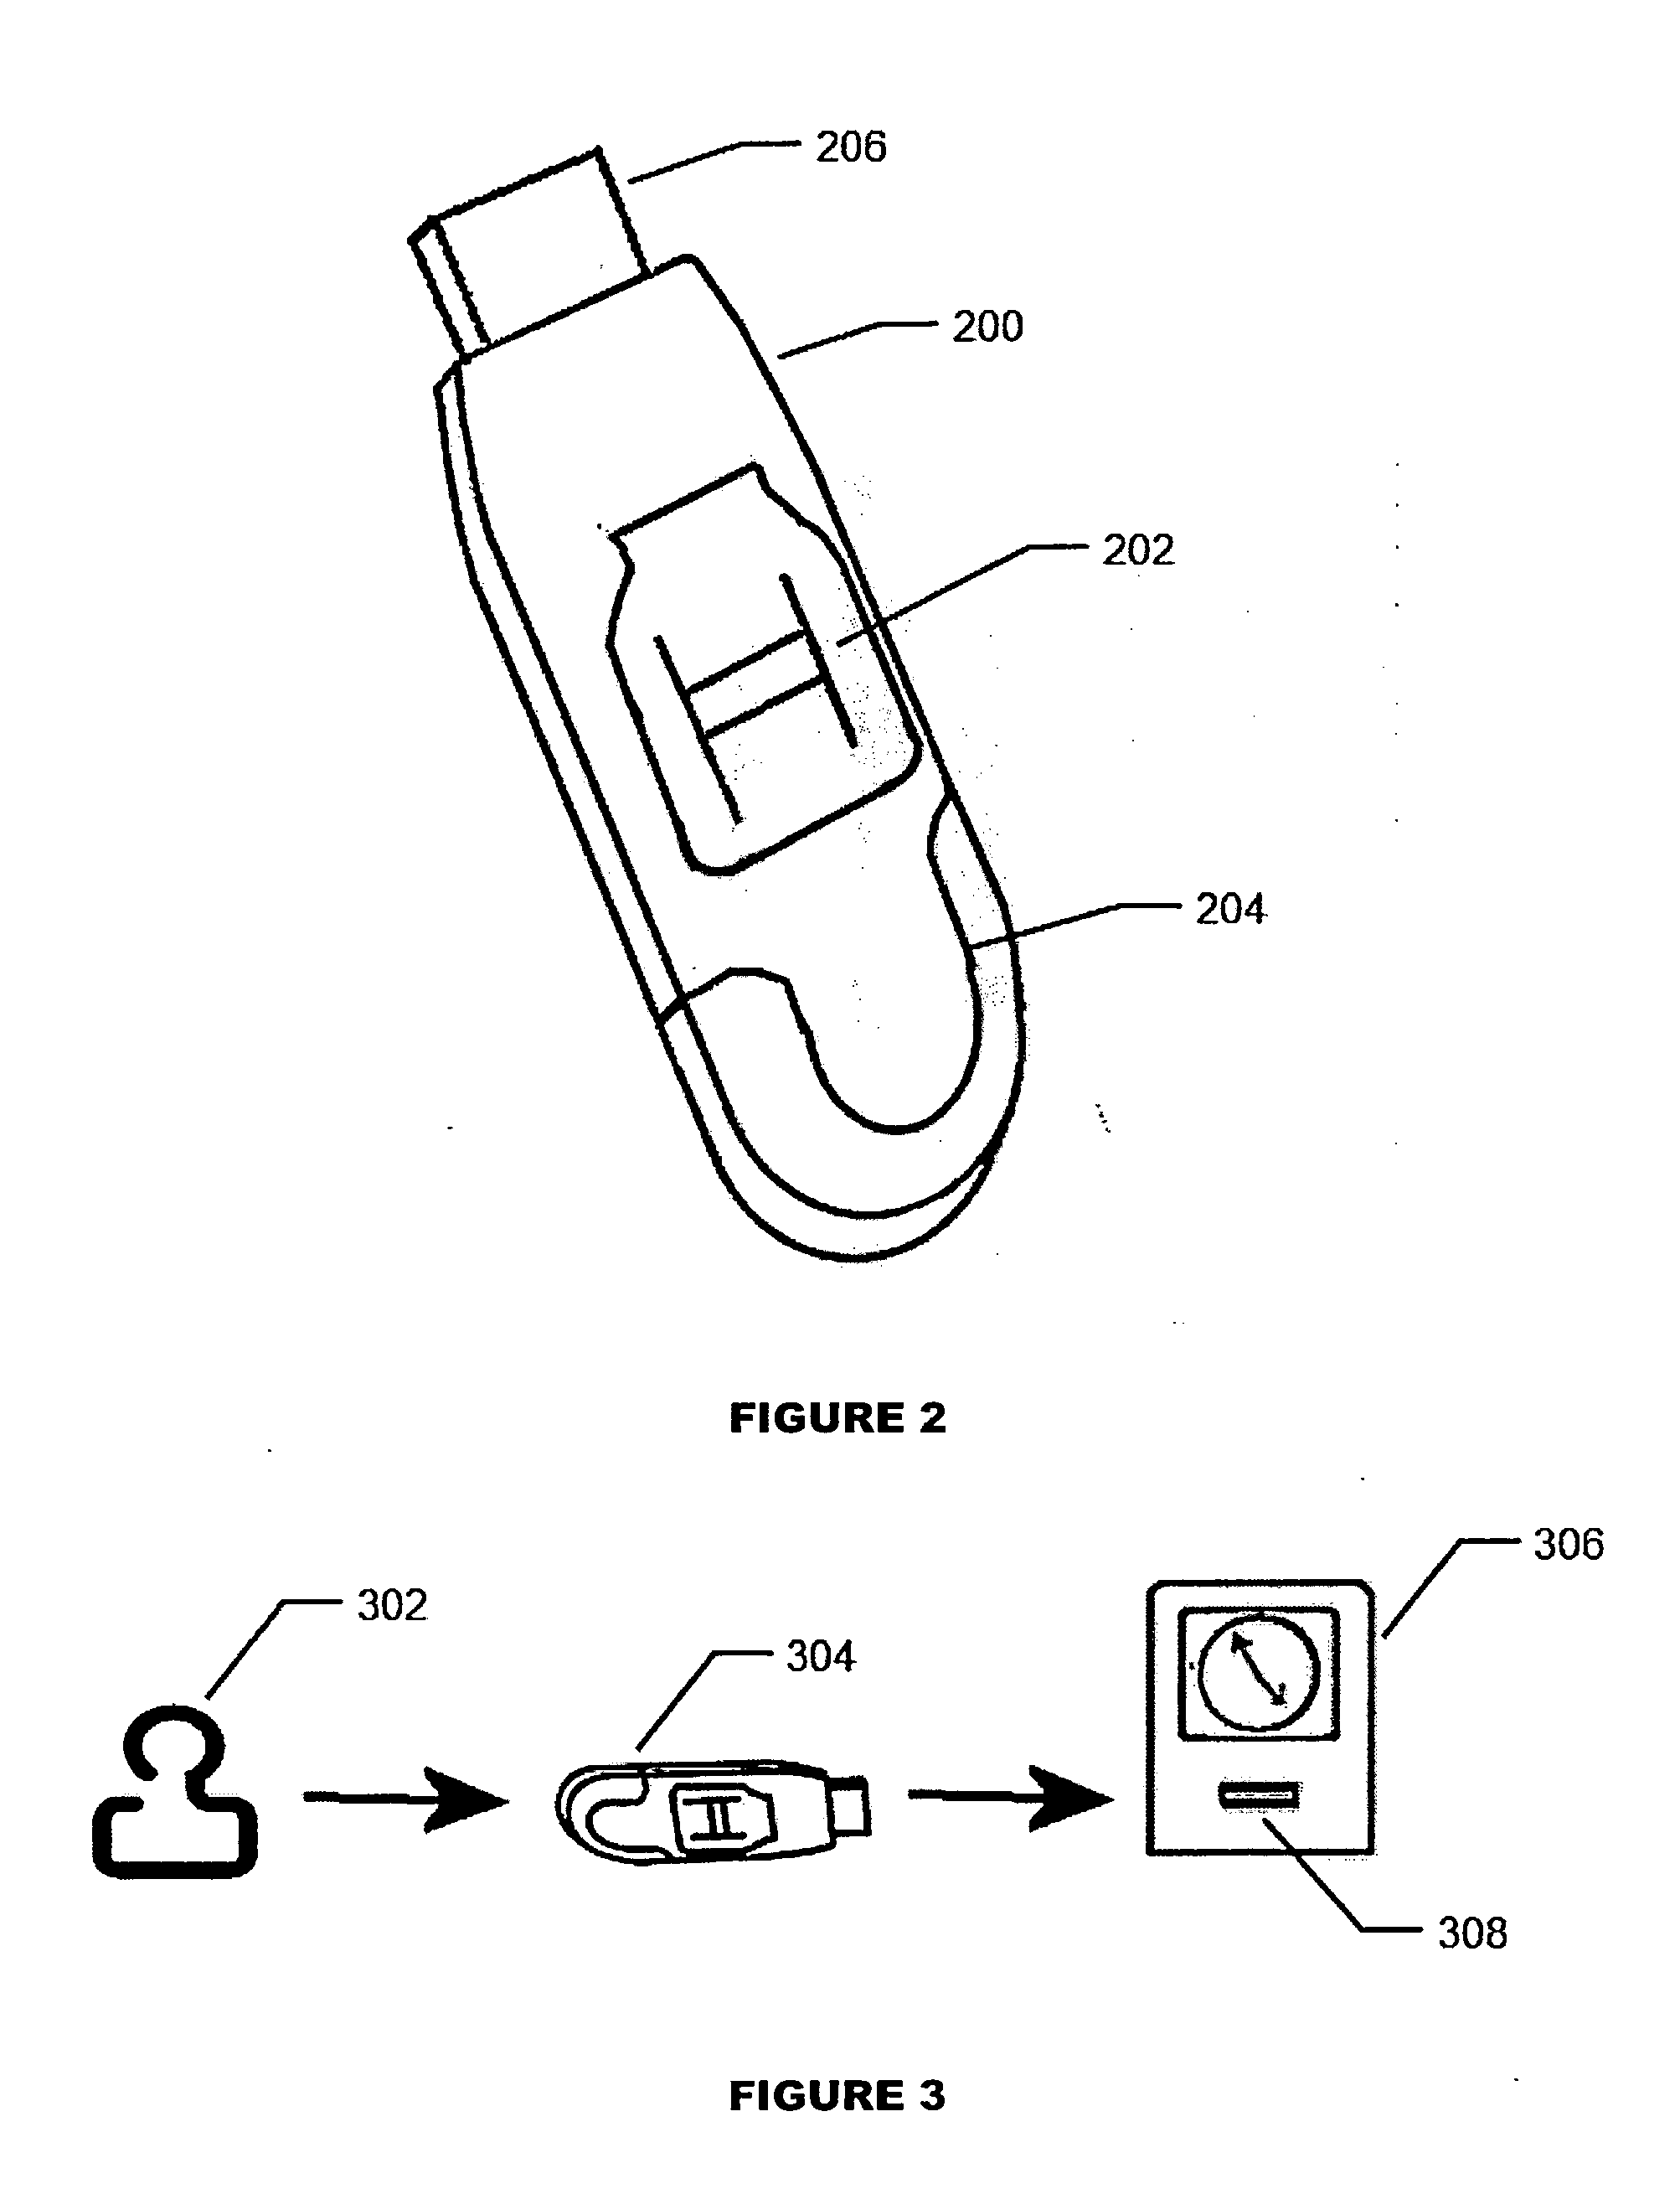 Personal biometric authentication system for secure timekeeping